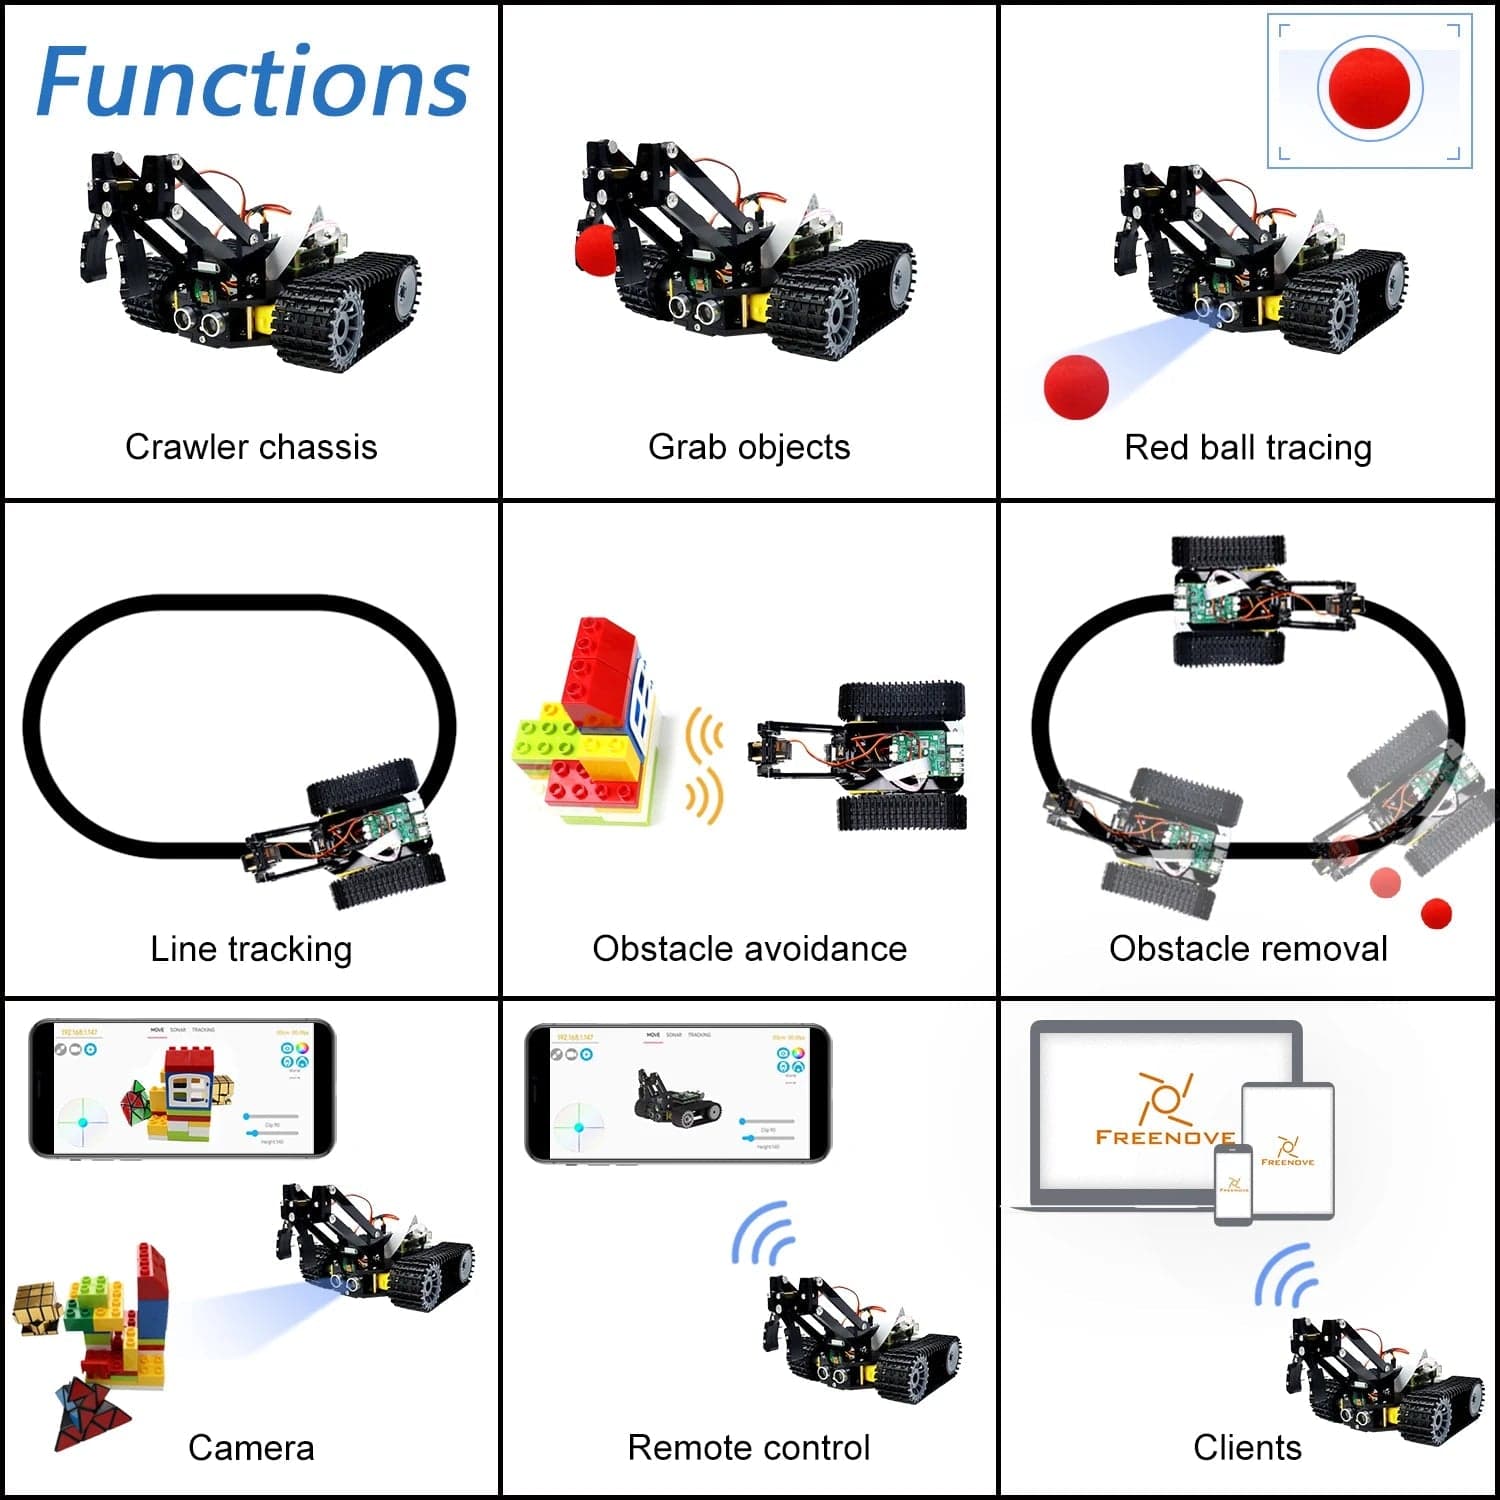 ÆLECTRONIX FREENOVE Robot Kit With Line Tracking